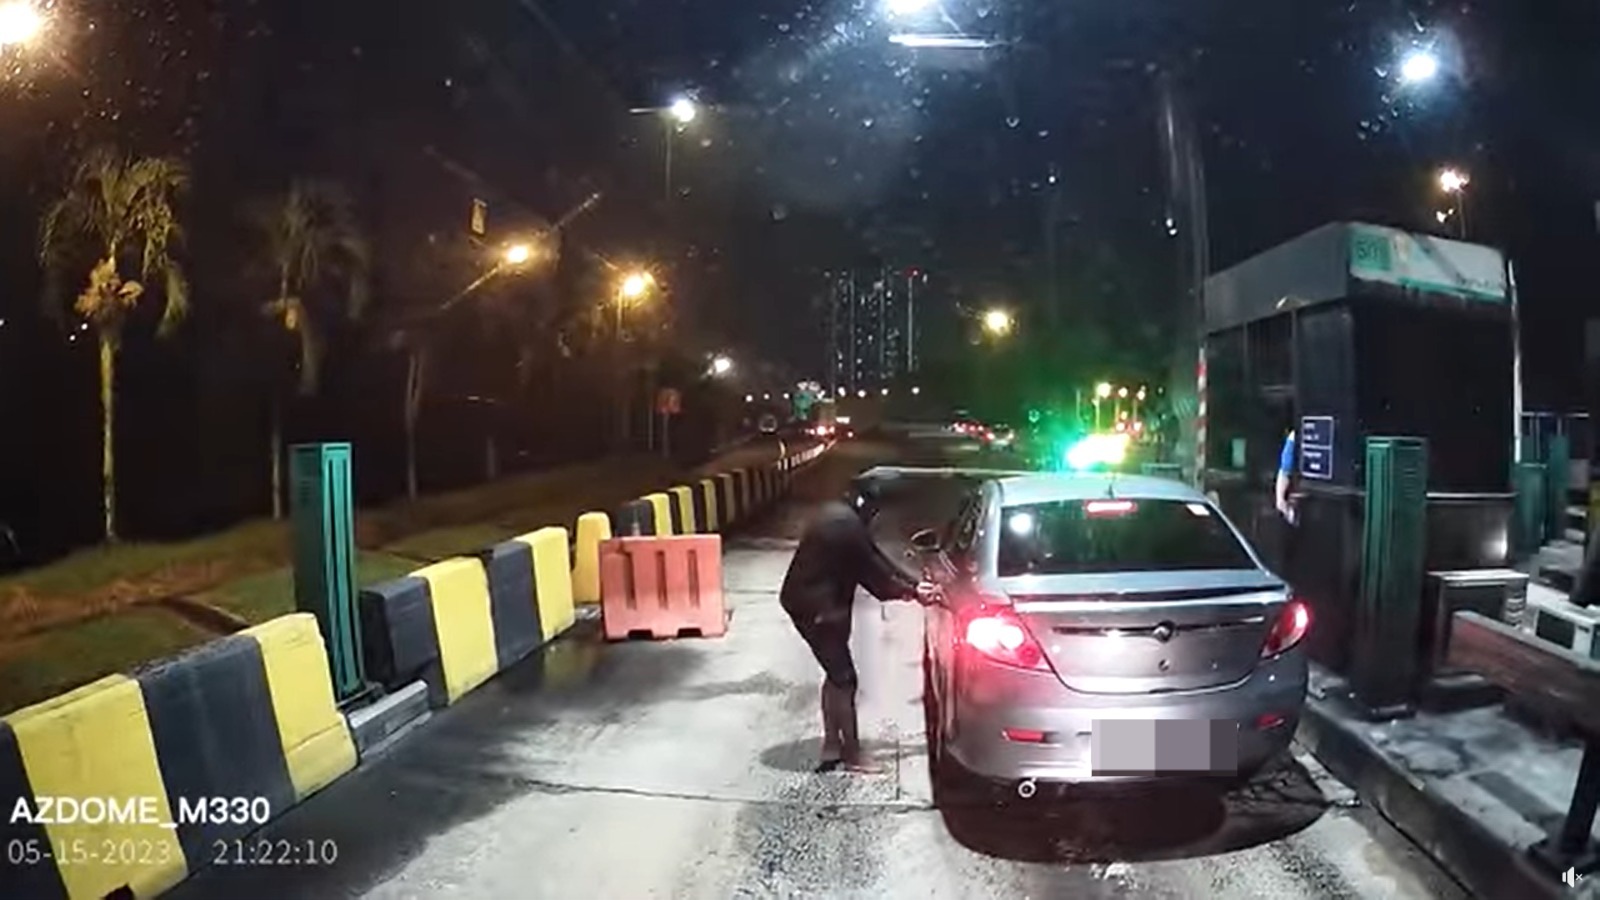 M'sian man strikes prayer pose while trying to hijack car, netizens believe he's mentally unwell